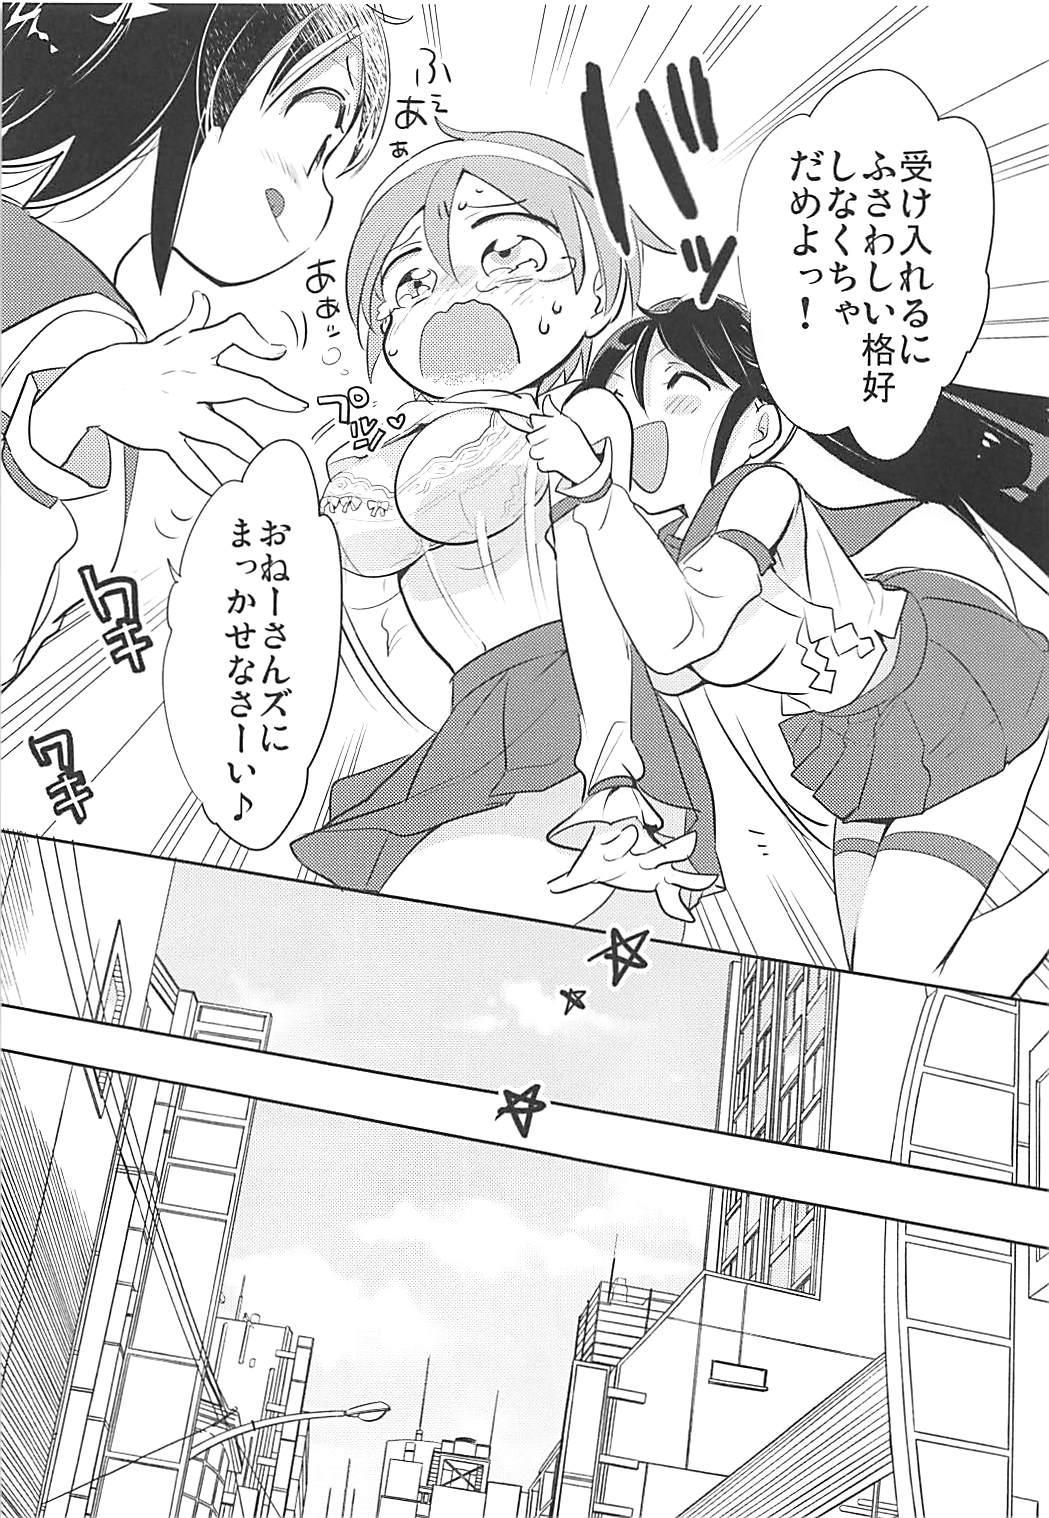 Canadian Kancollation EX 4 - Kantai collection Spa - Page 10